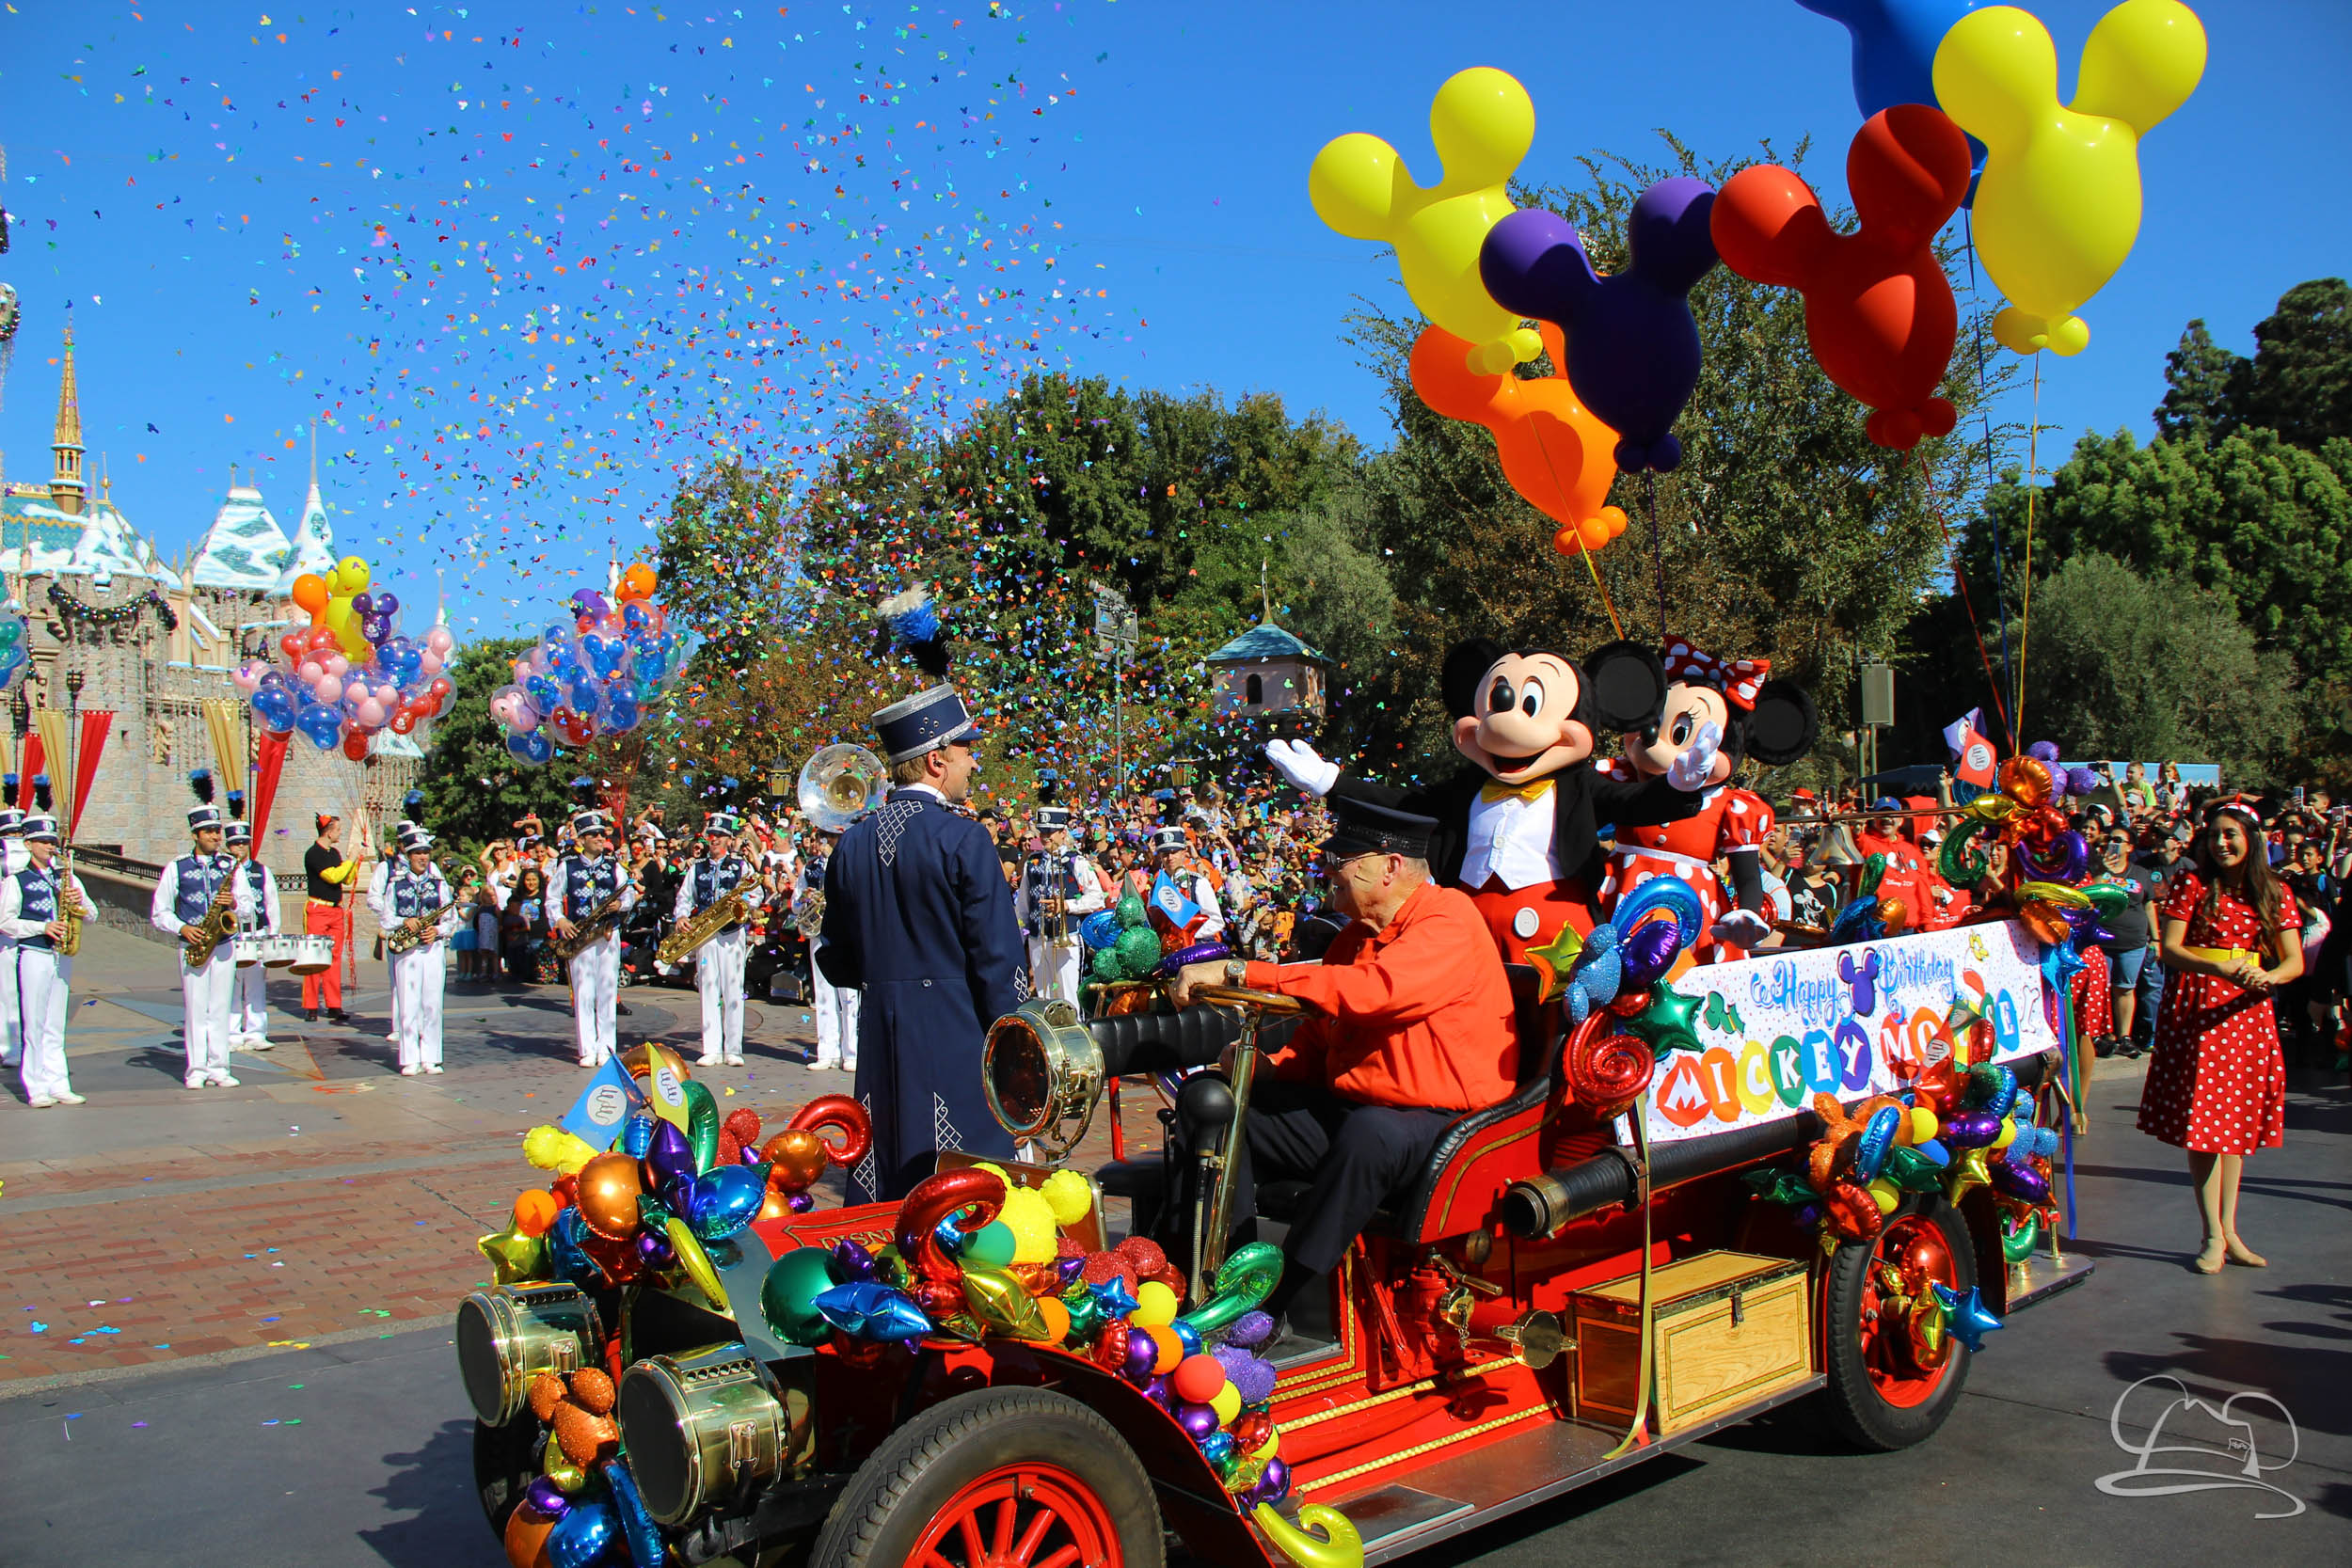 Disneyland Gives Mickey Mouse a Birthday Surprise